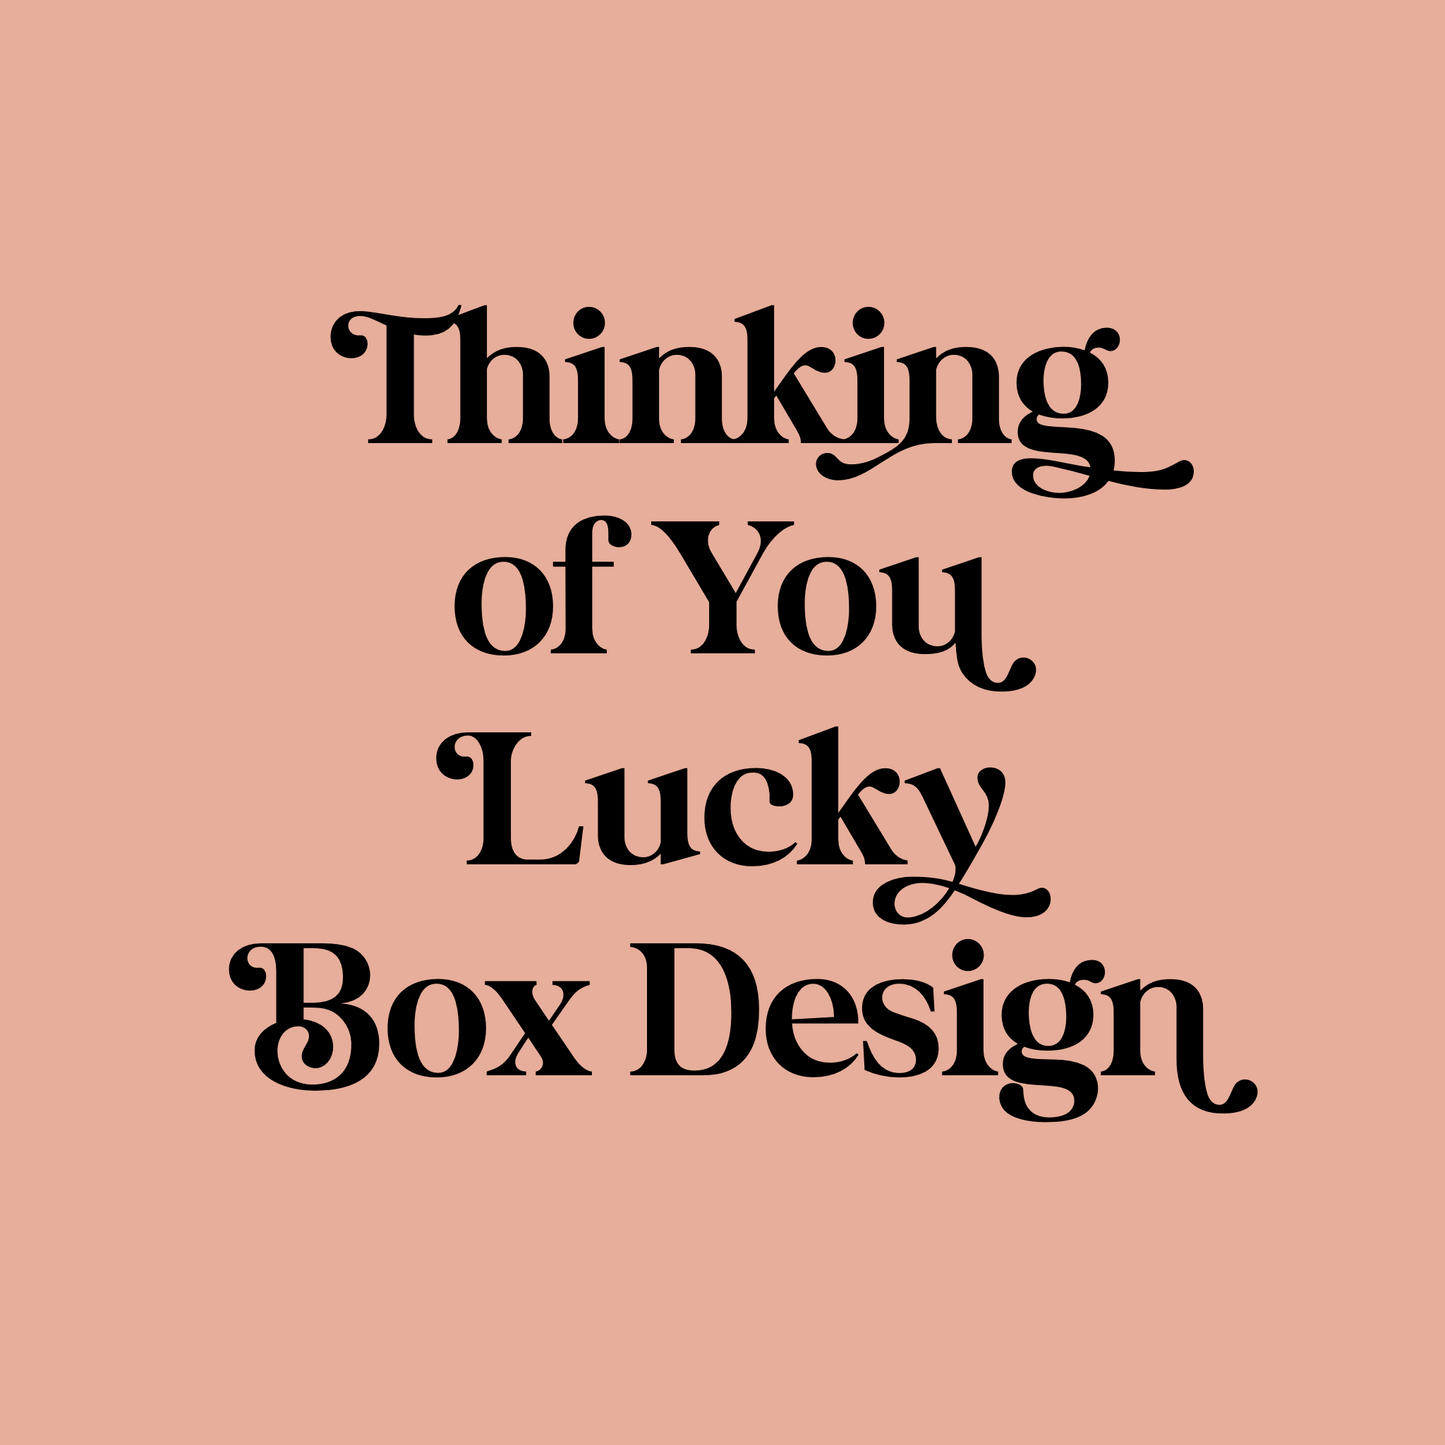 Thinking of You Lucky Box